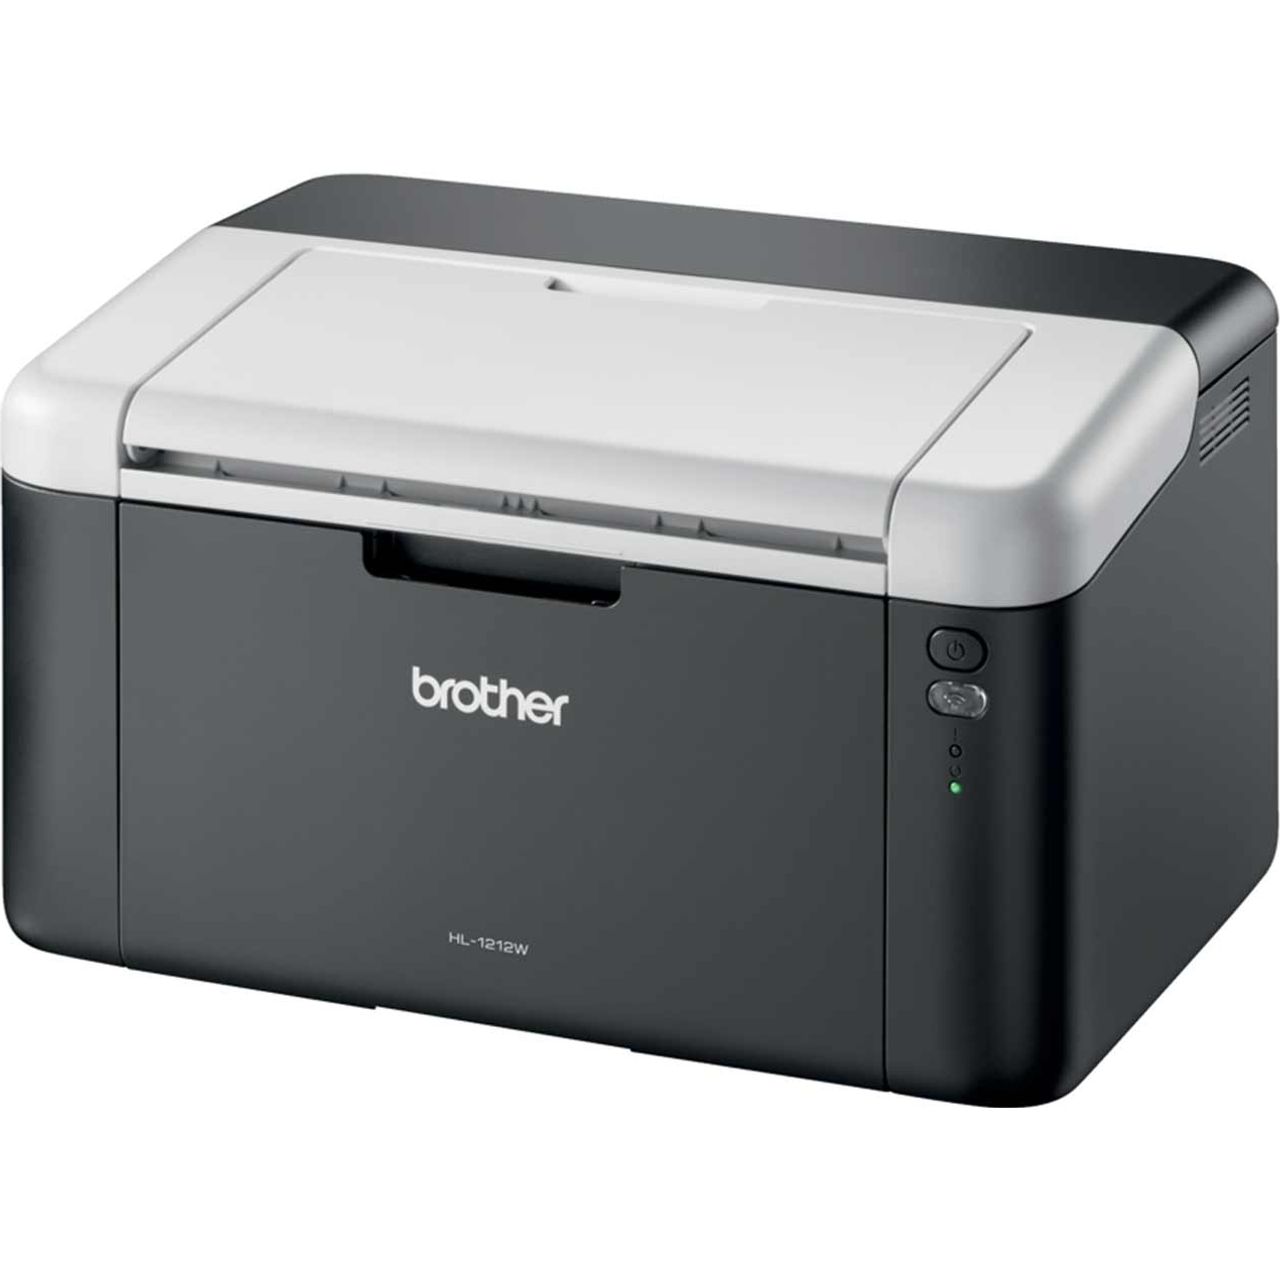 Brother HL-1212W Compact Wireless Mono Laser Printer Review